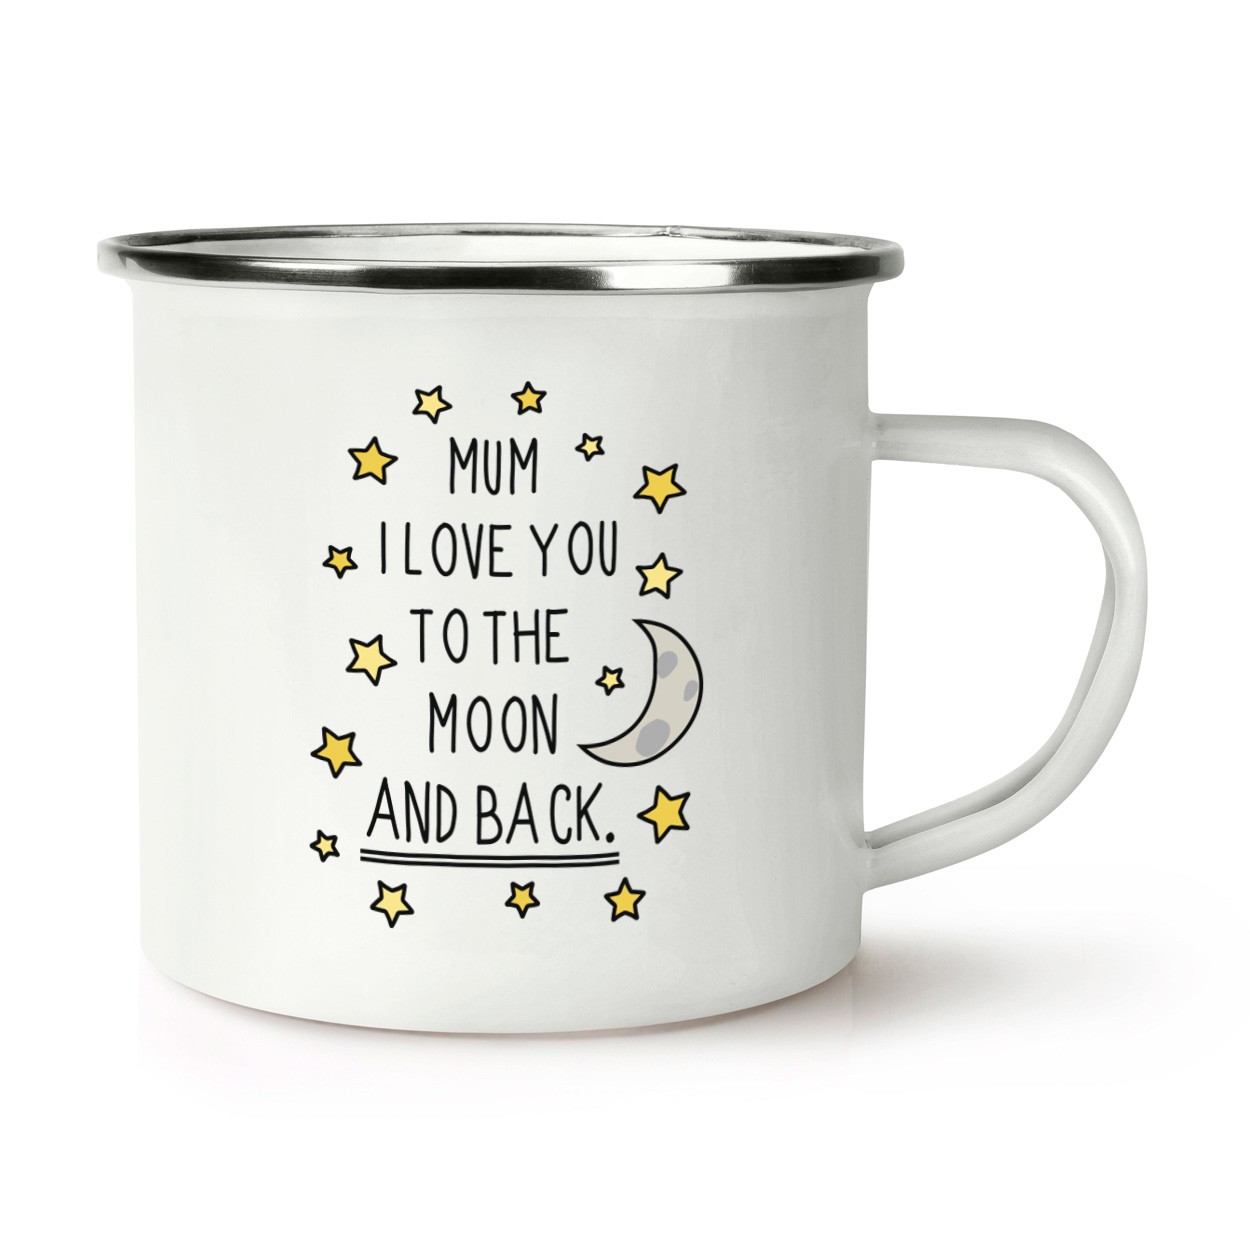 Mum I Love You To The Moon And Back Retro Enamel Mug Cup